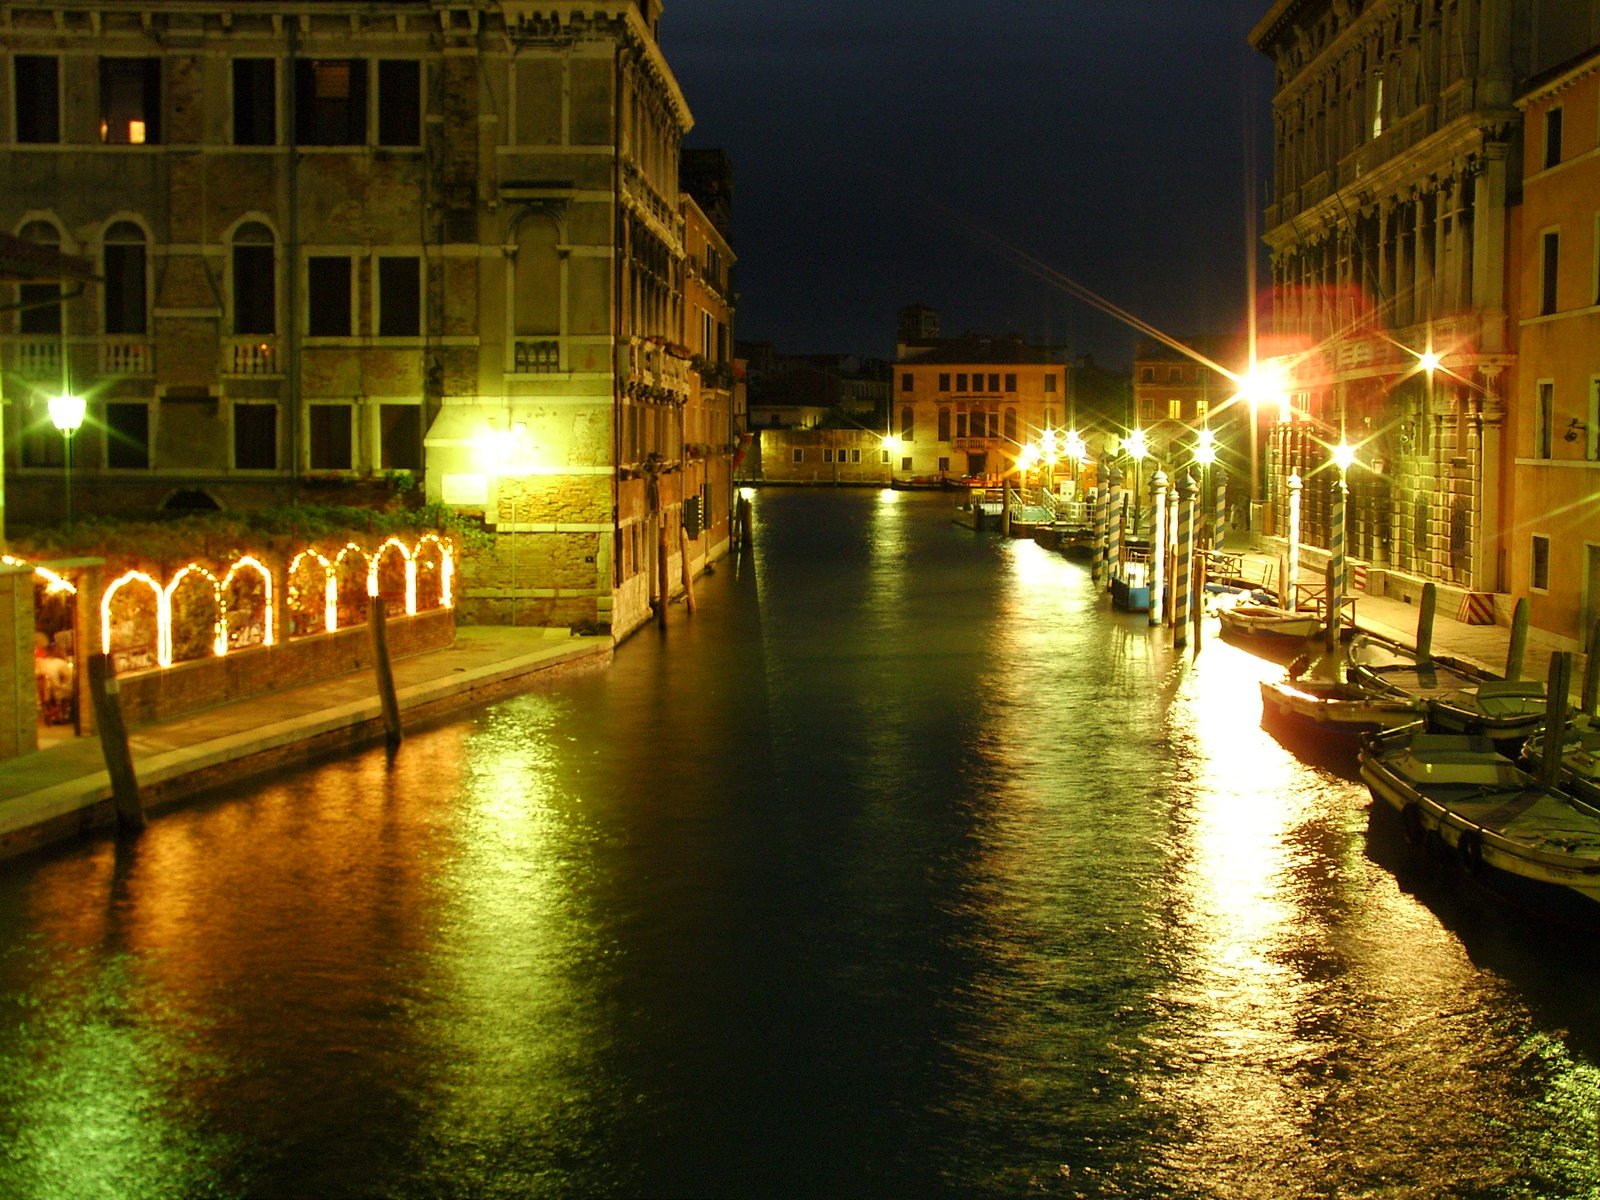 a long canal surrounded by brick buildings next to lights